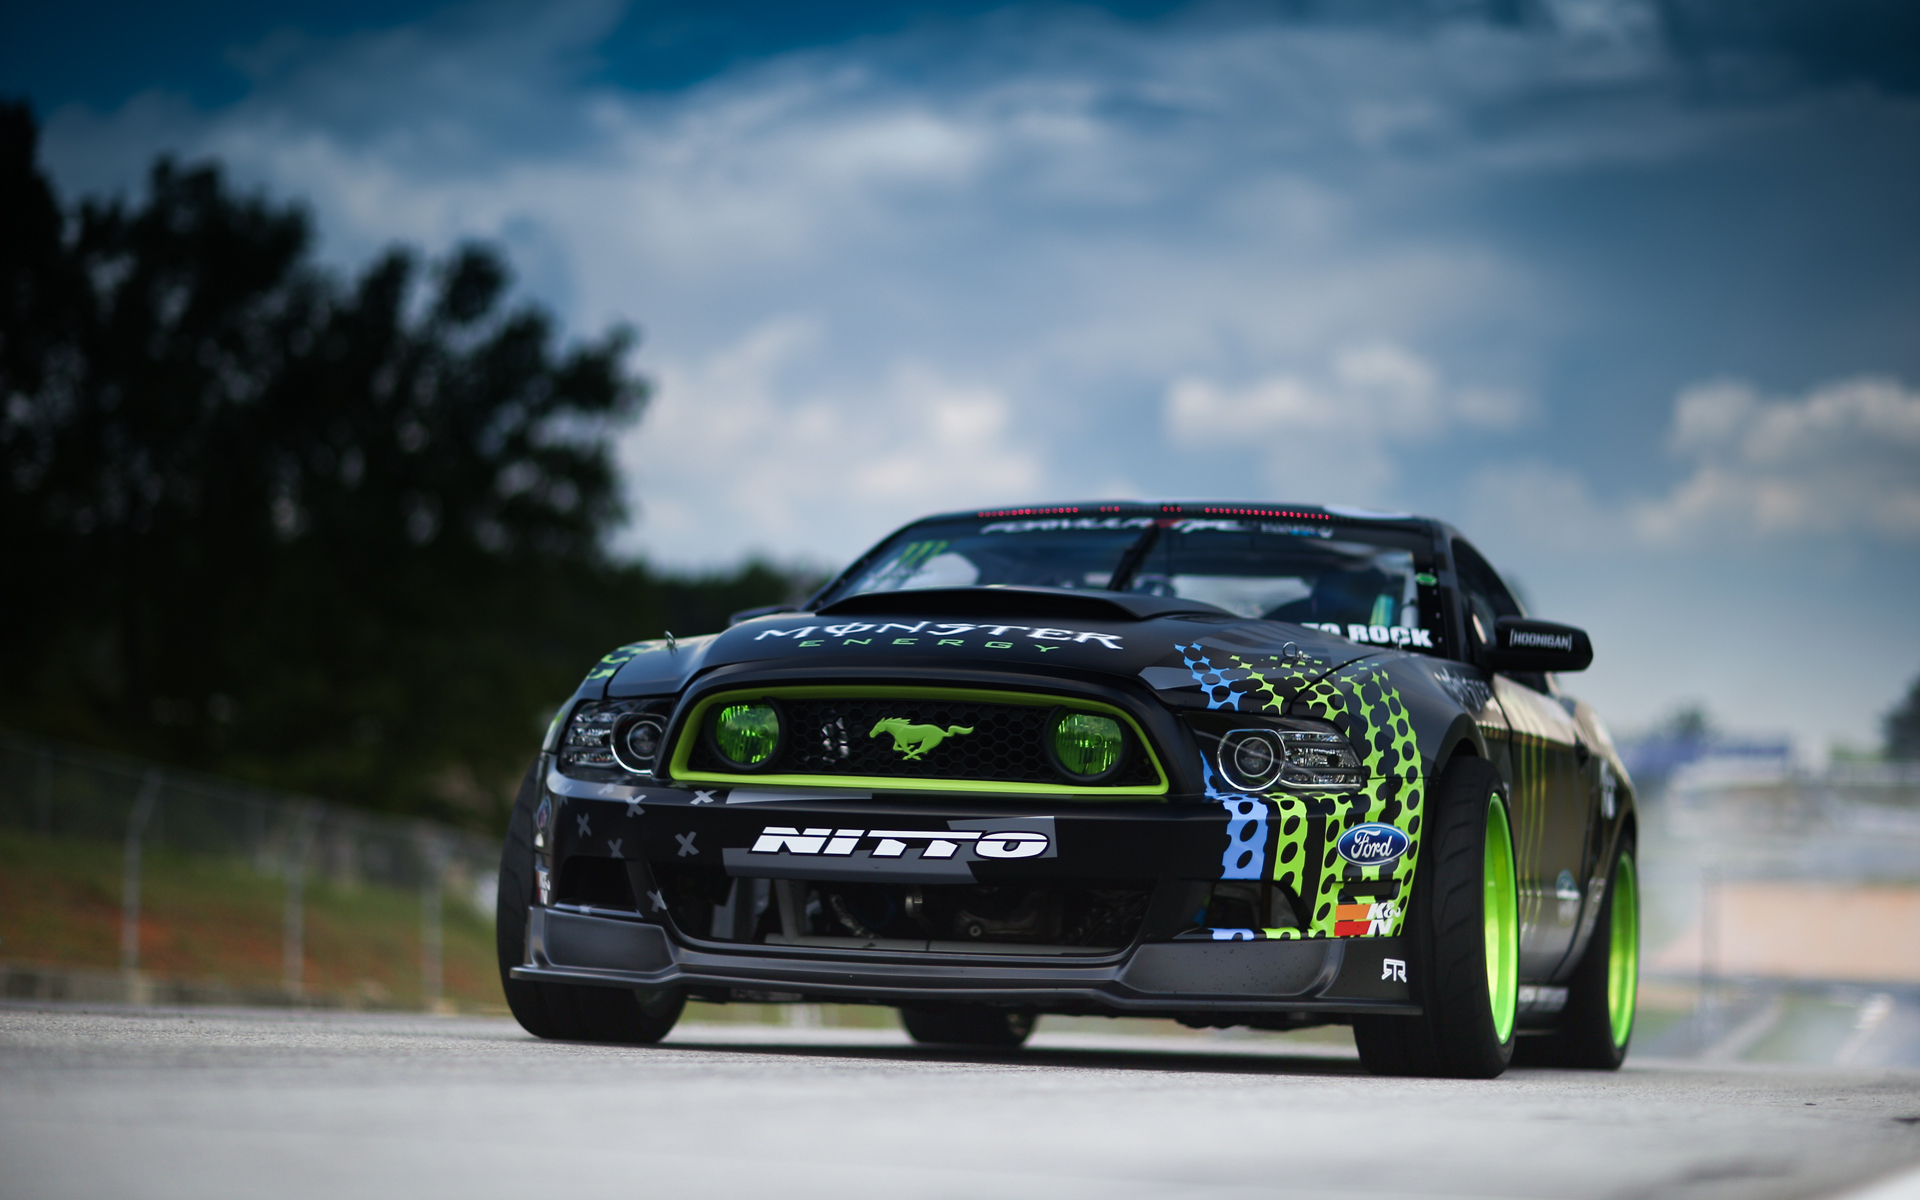 Car Ford Ford Mustang Rtr Race Car 1920x1200